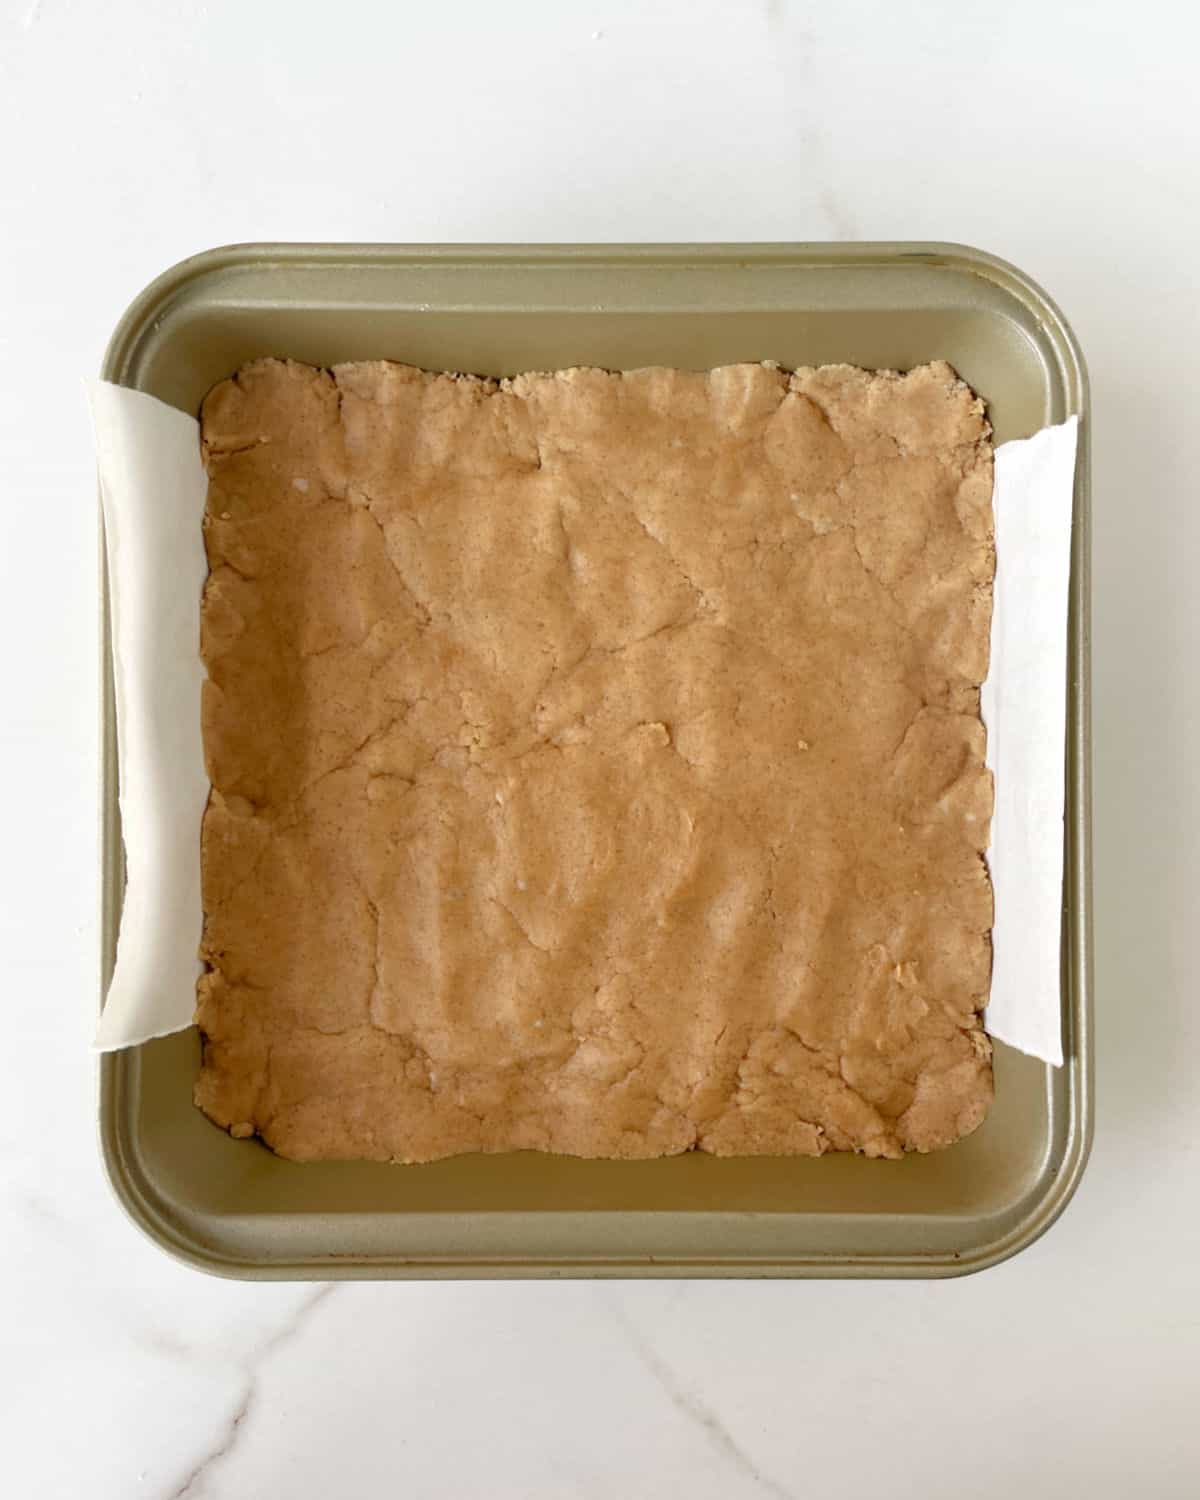 Peanut butter fudge layer on a gold colored square pan on a white marble surface.